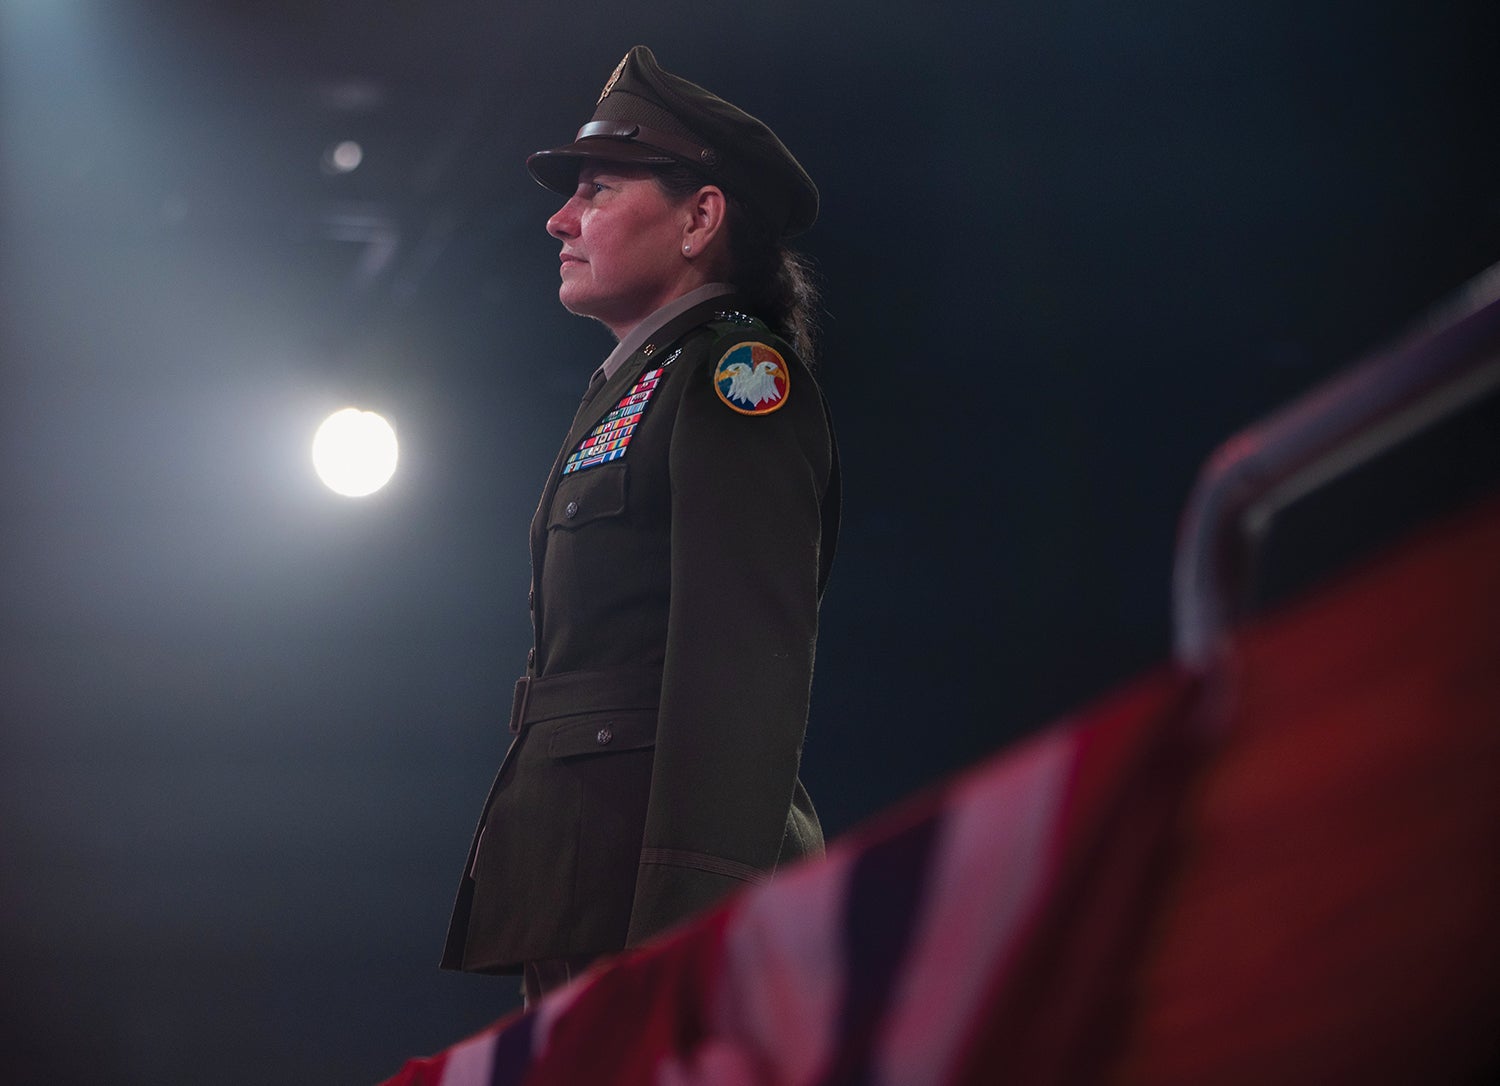 Lt. Gen. Jody Daniels, chief of the U.S. Army Reserve and commander of the U.S. Army Reserve Command, hosts an Army Twilight Tattoo performance at Joint Base Myer-Henderson Hall, Virginia. (Credit: U.S. Army Reserve/Sgt. Maria Casneiro)